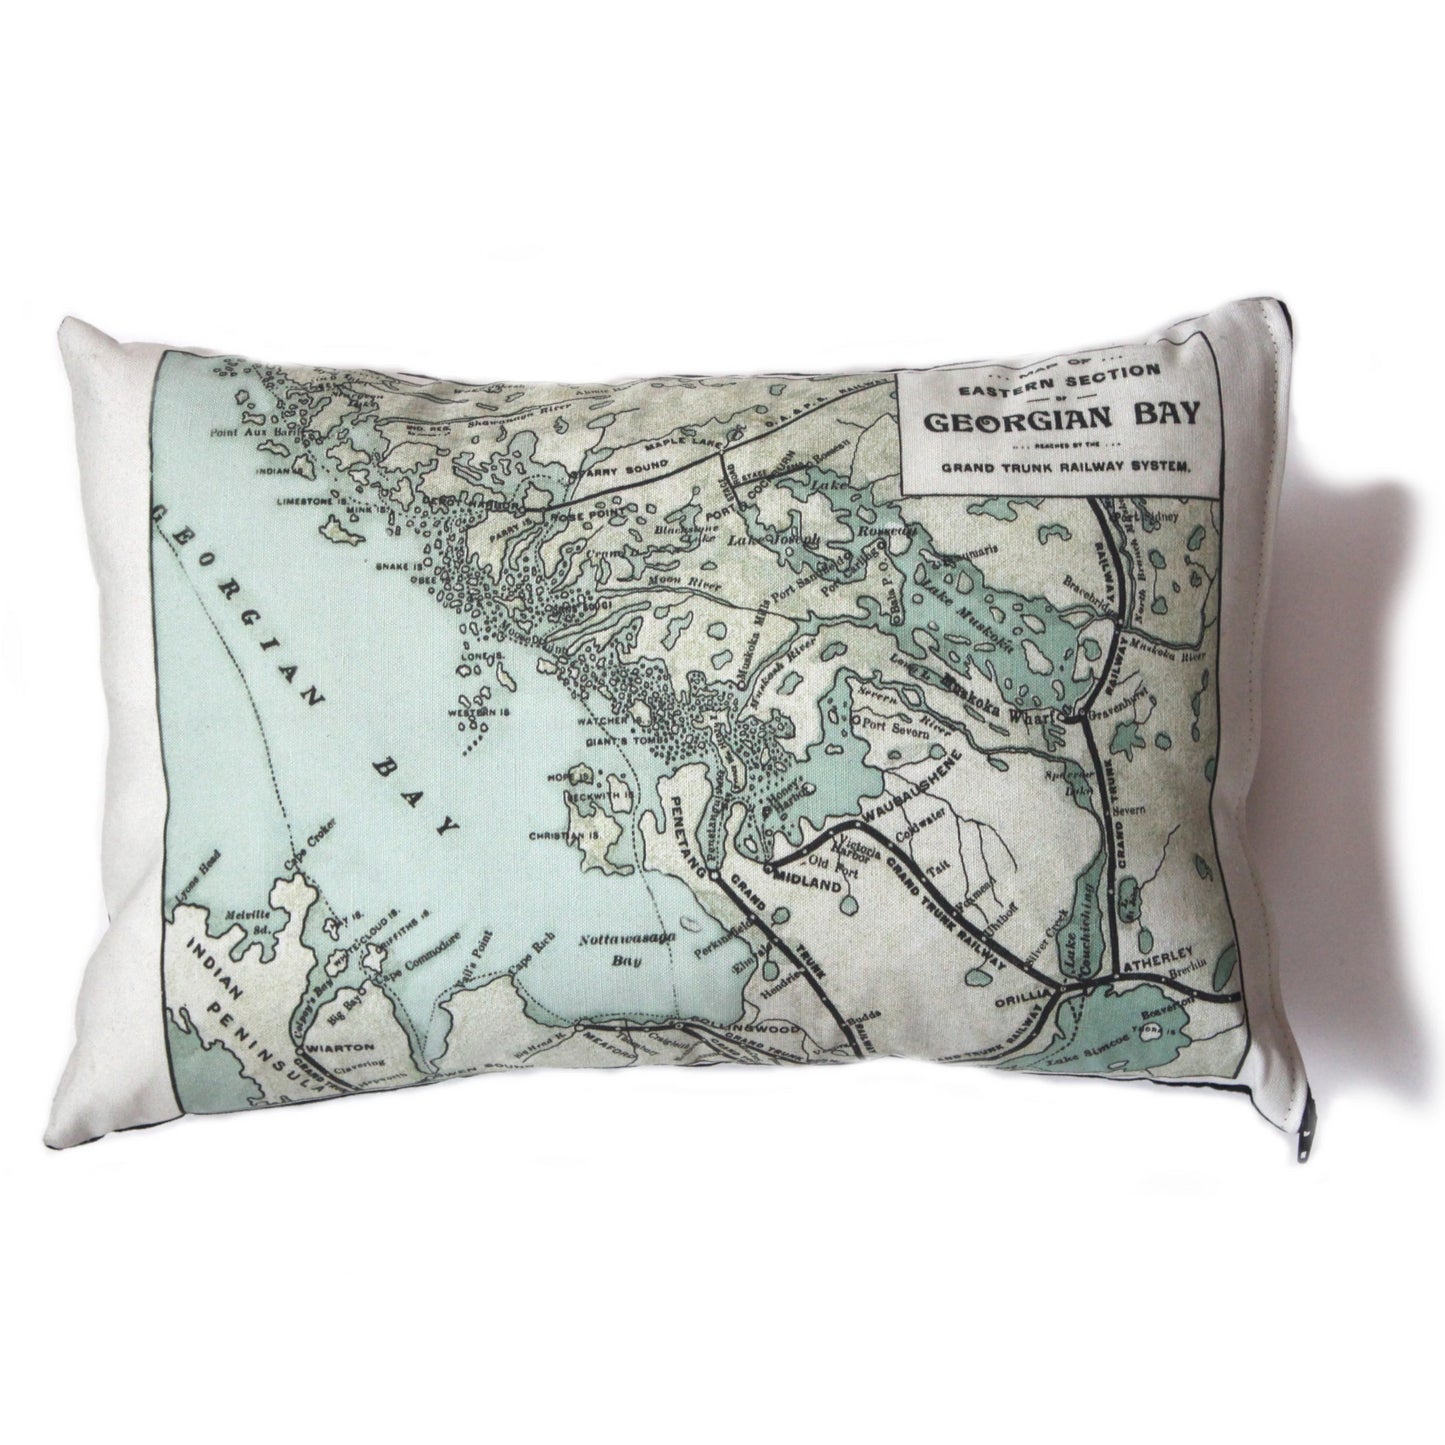 Made in Canada linen pillow case with hand printed vintage map of the eastern shore of Georgian Bay in Ontario, Canada.